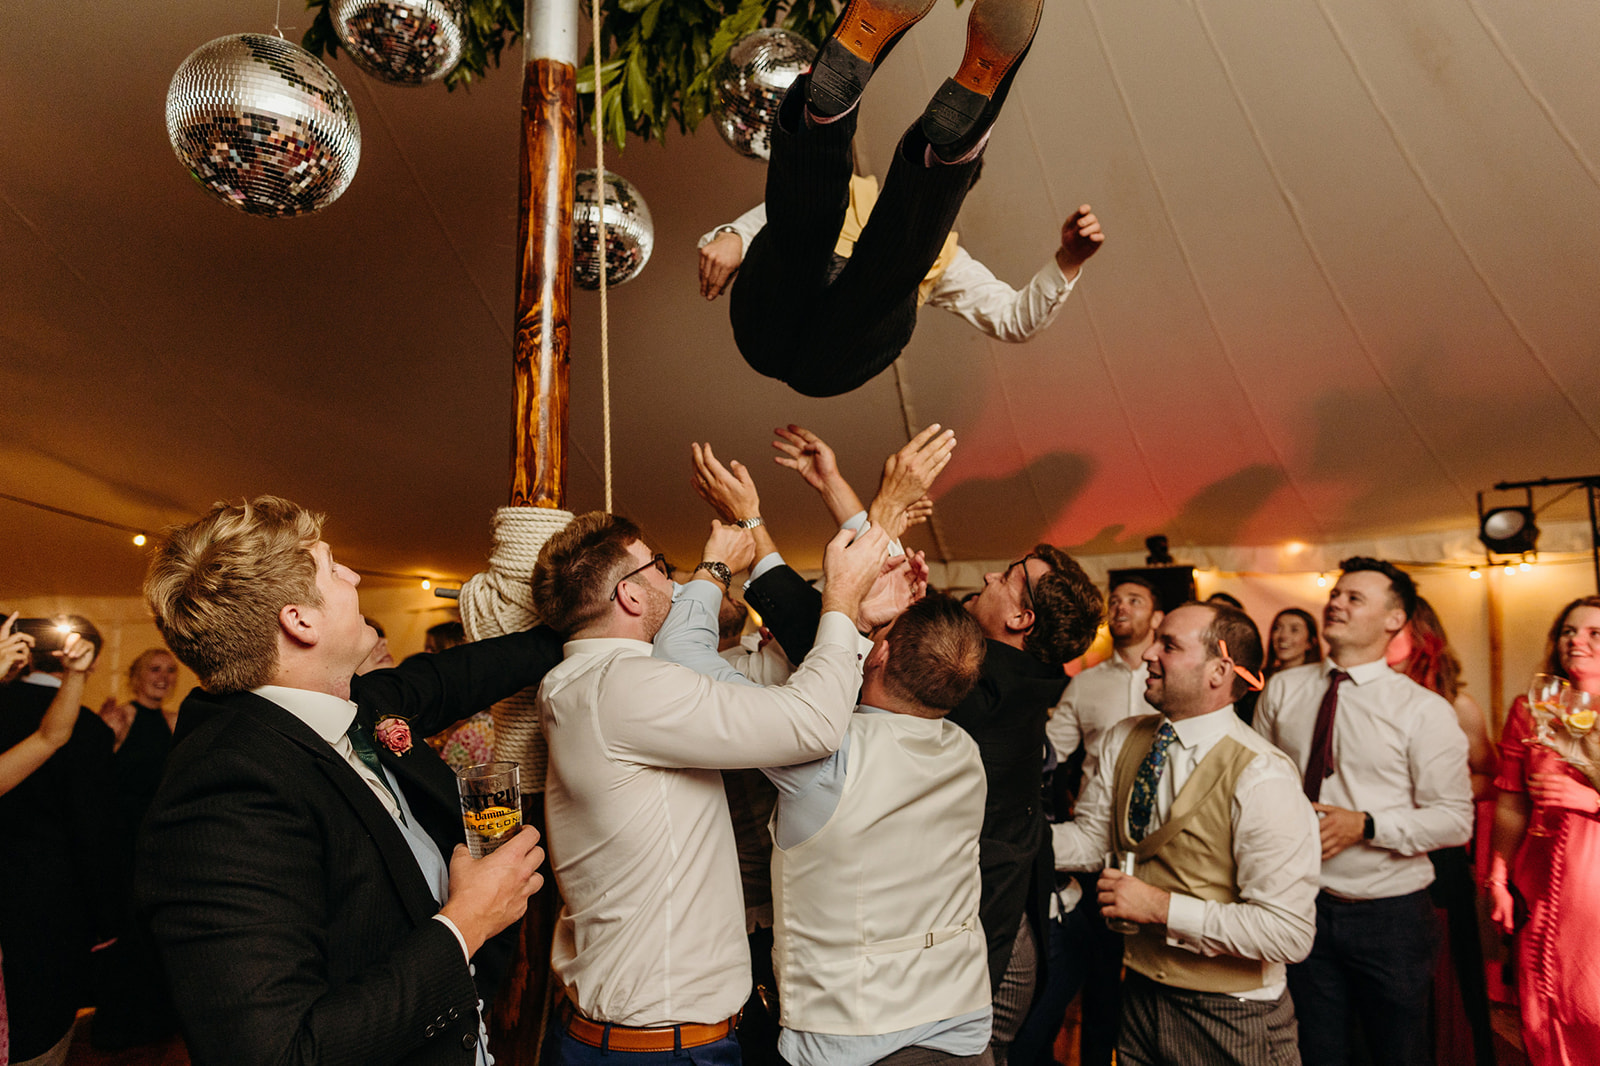 Exuberant wedding reception moment: Man tossed in the air by cheering guests on the dance floor inside a lively tent.